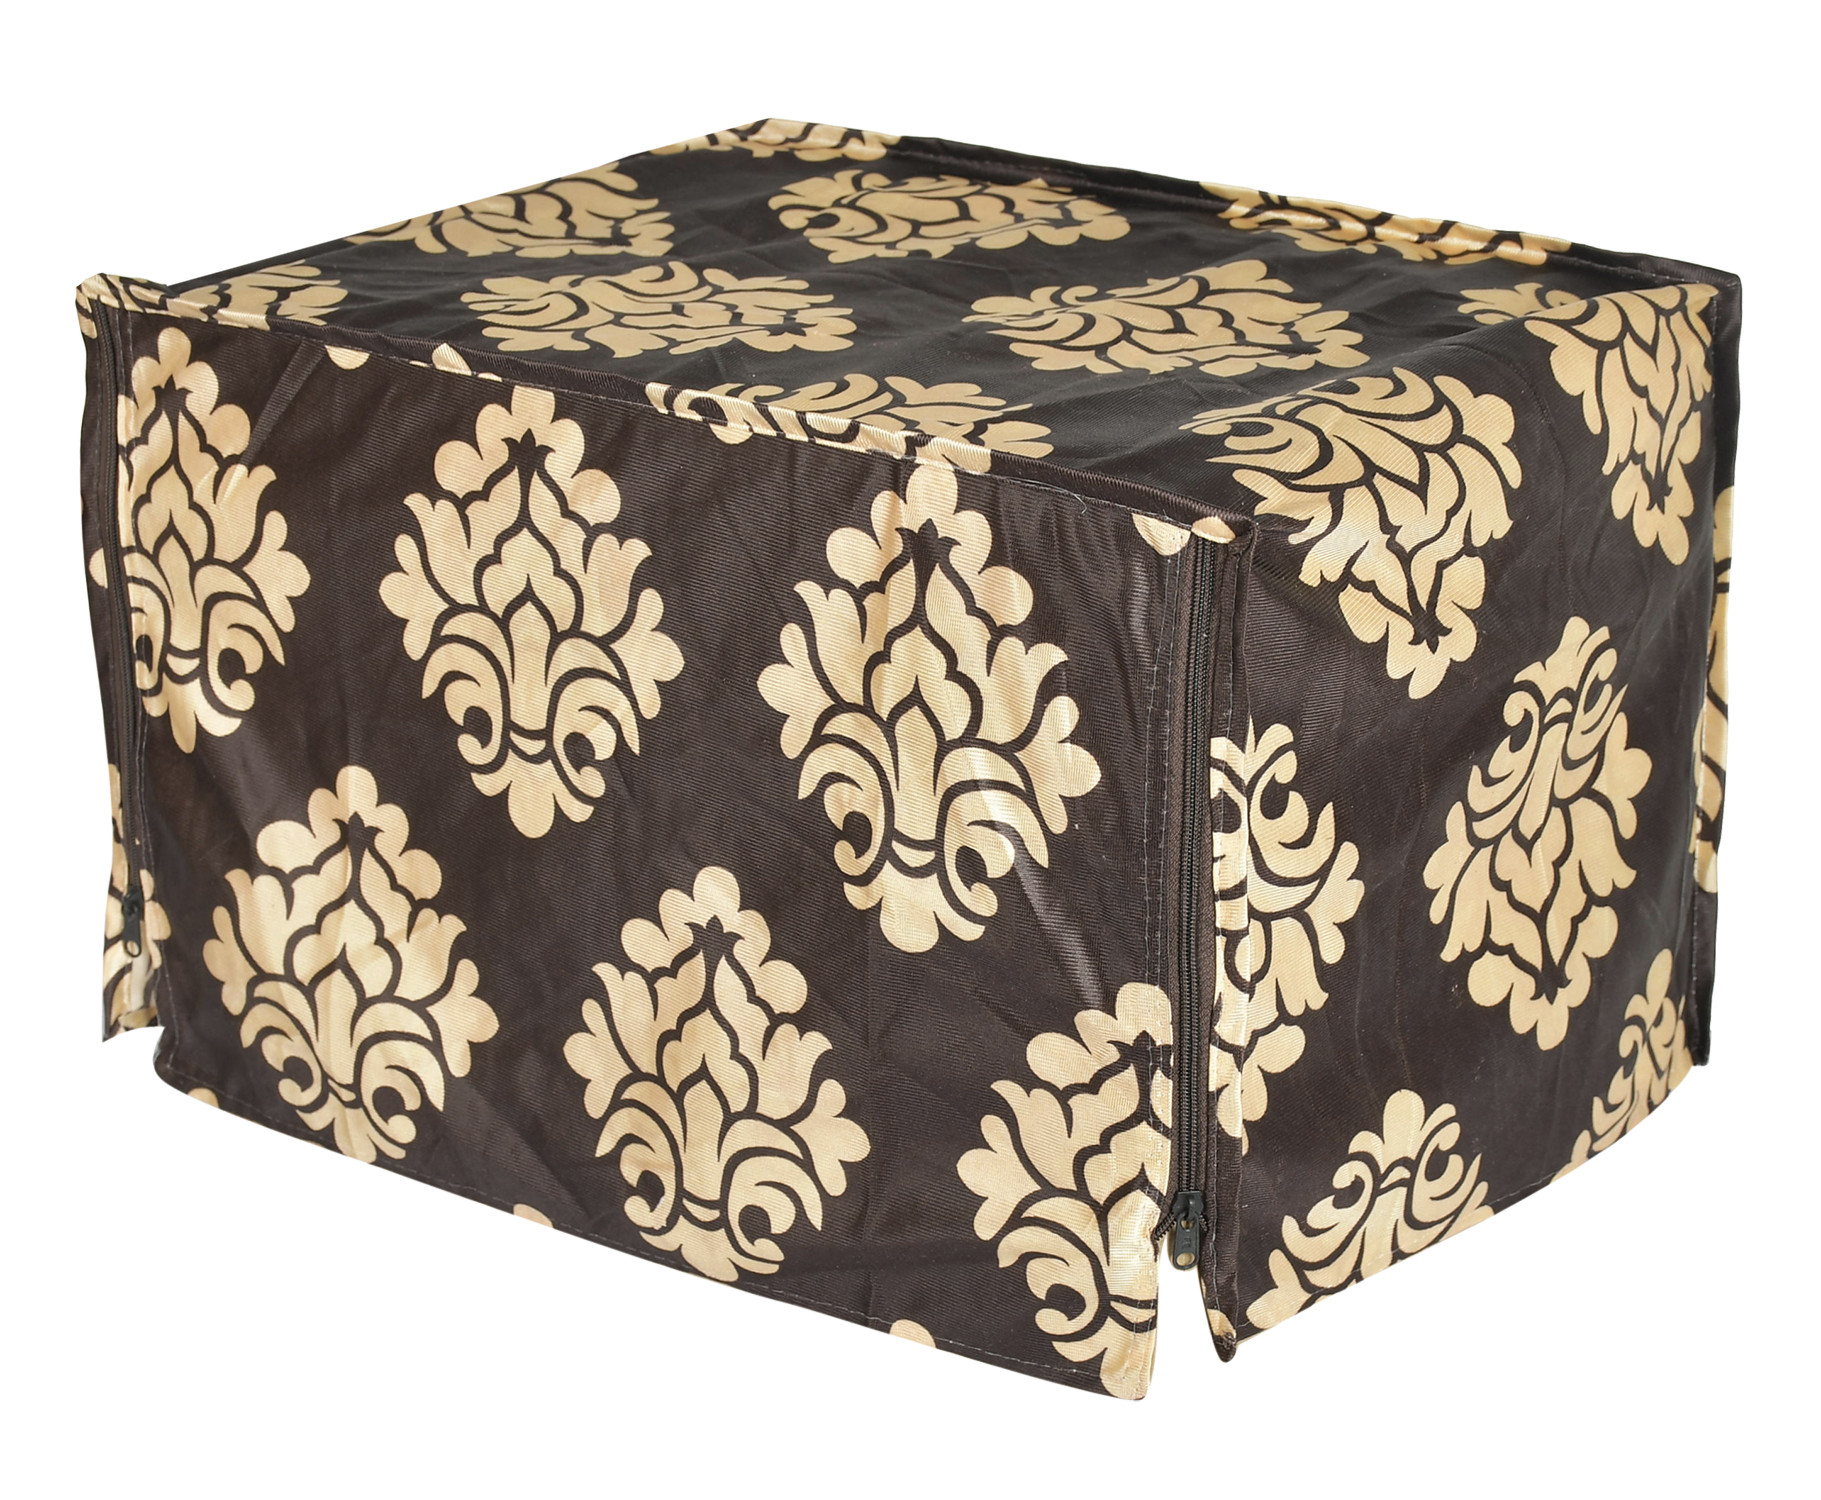 Kuber Industries Polyster Floral Printed Microwave Oven Cover,20 Ltr. (Brown)-HS43KUBMART25929